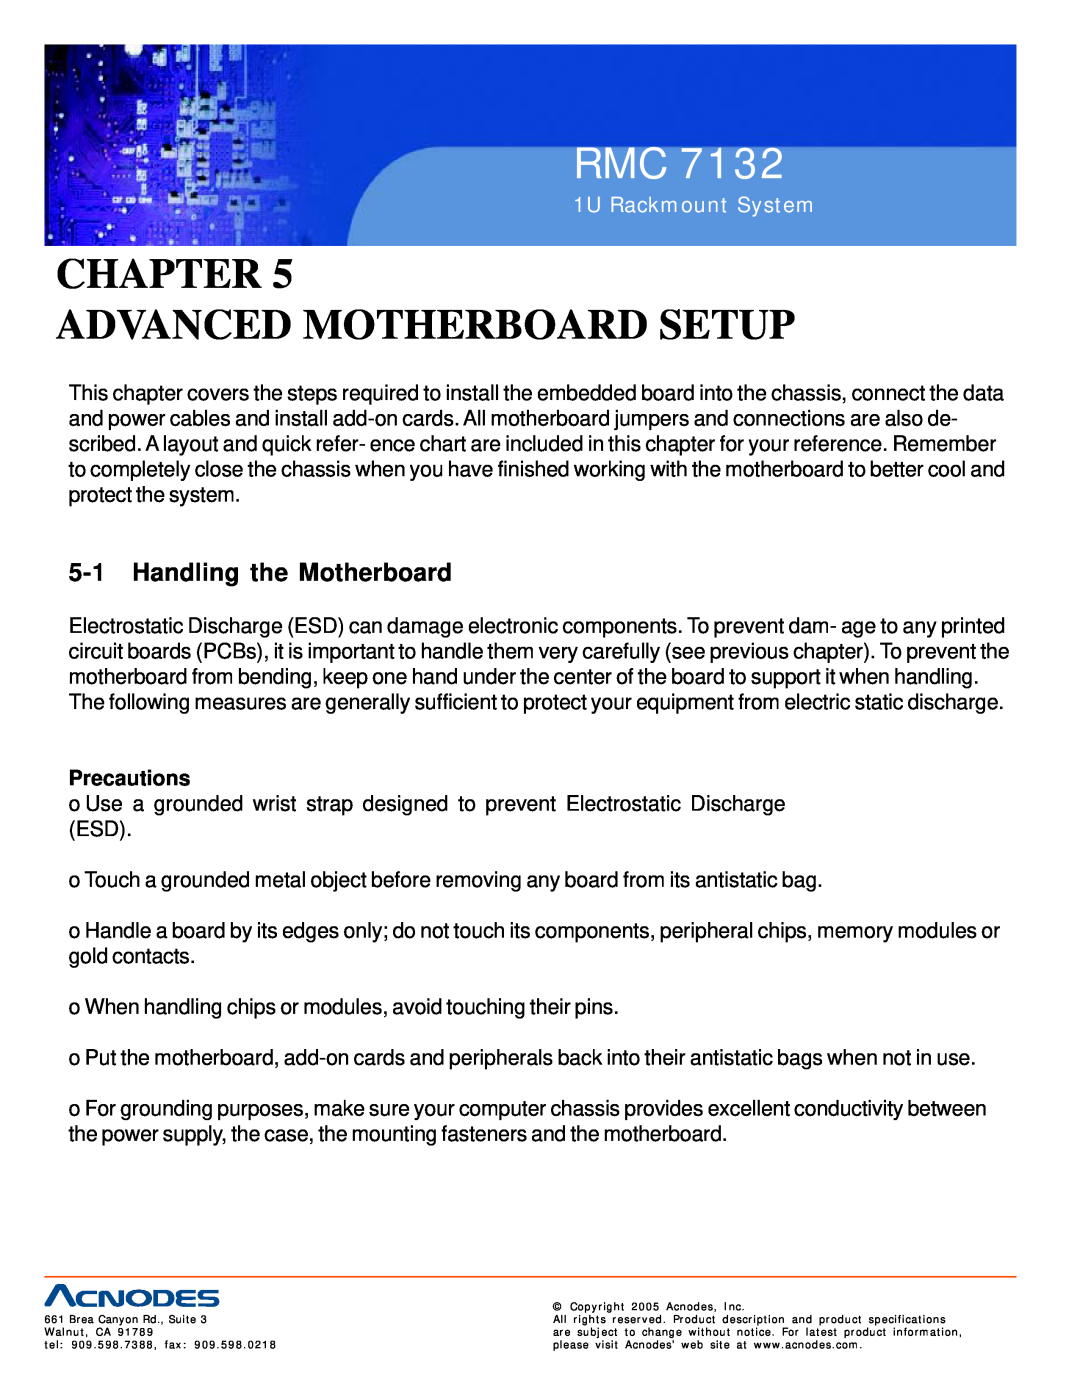 Acnodes RMC 7132 user manual Chapter Advanced Motherboard Setup, Handling the Motherboard, Precautions, 1U Rackmount System 